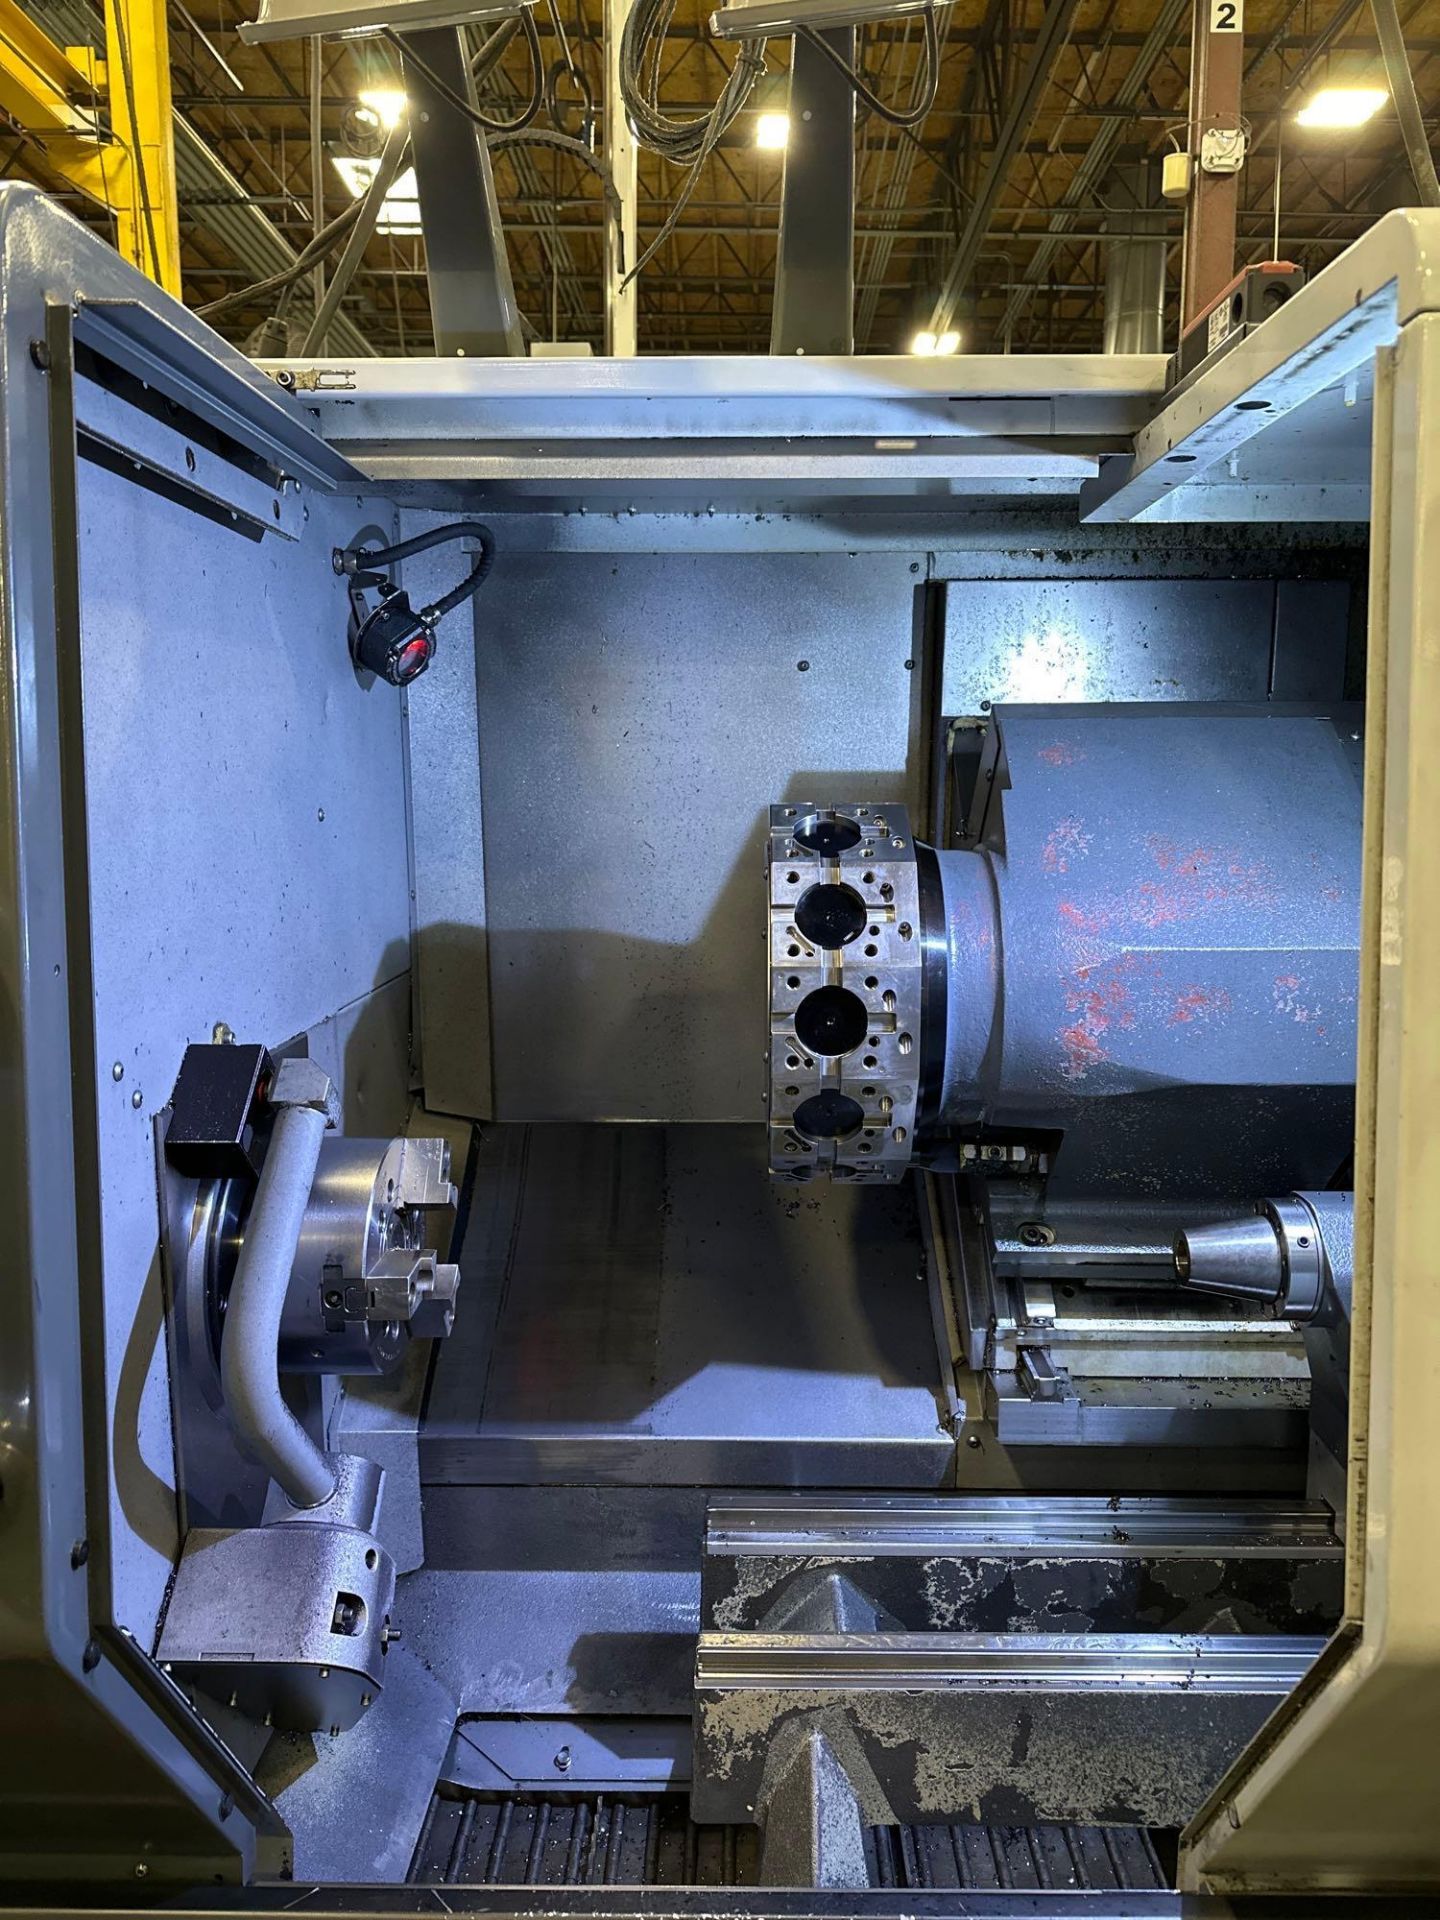 Haas ST-20Y CNC Lathe, VB24, 24 Station Turret. 4000RPM, 20HP, s/n 3106156, 2017 - Image 5 of 11